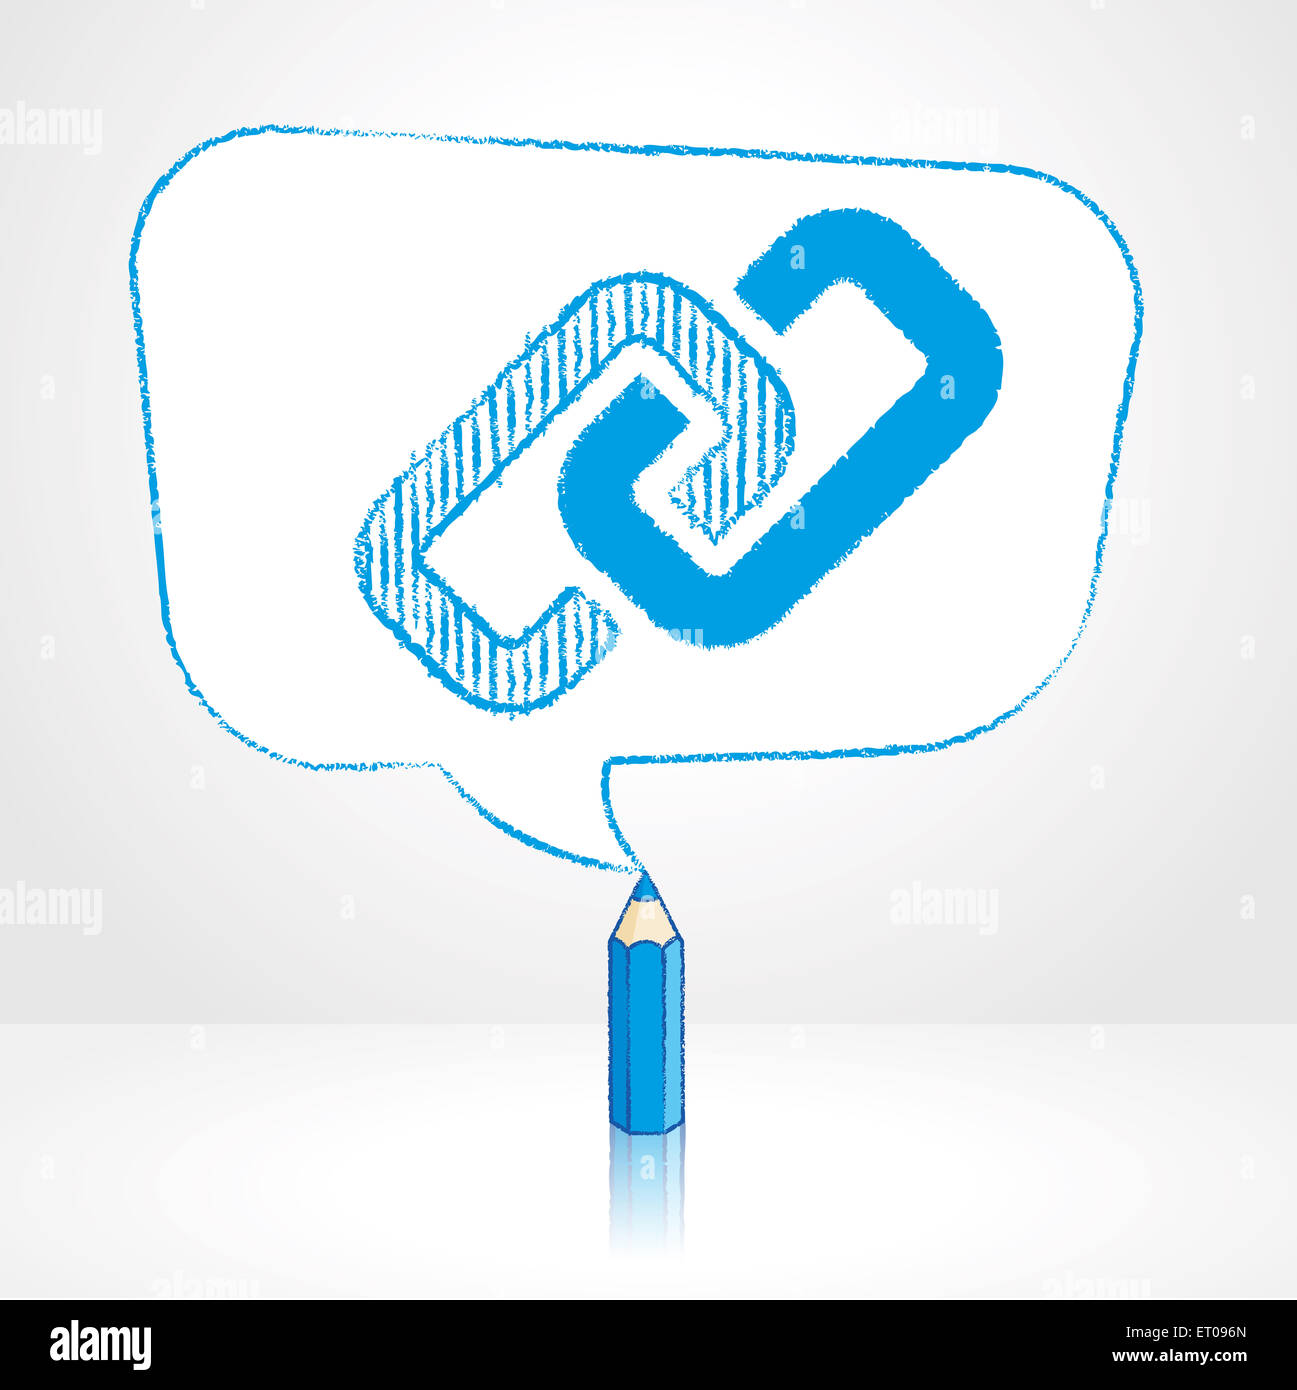 Blue Pencil with Reflection Drawing Digital Media Link Icon in Rounded Skewed Rectangular Shaped Speech Bubble on Pale Backgroun Stock Photo